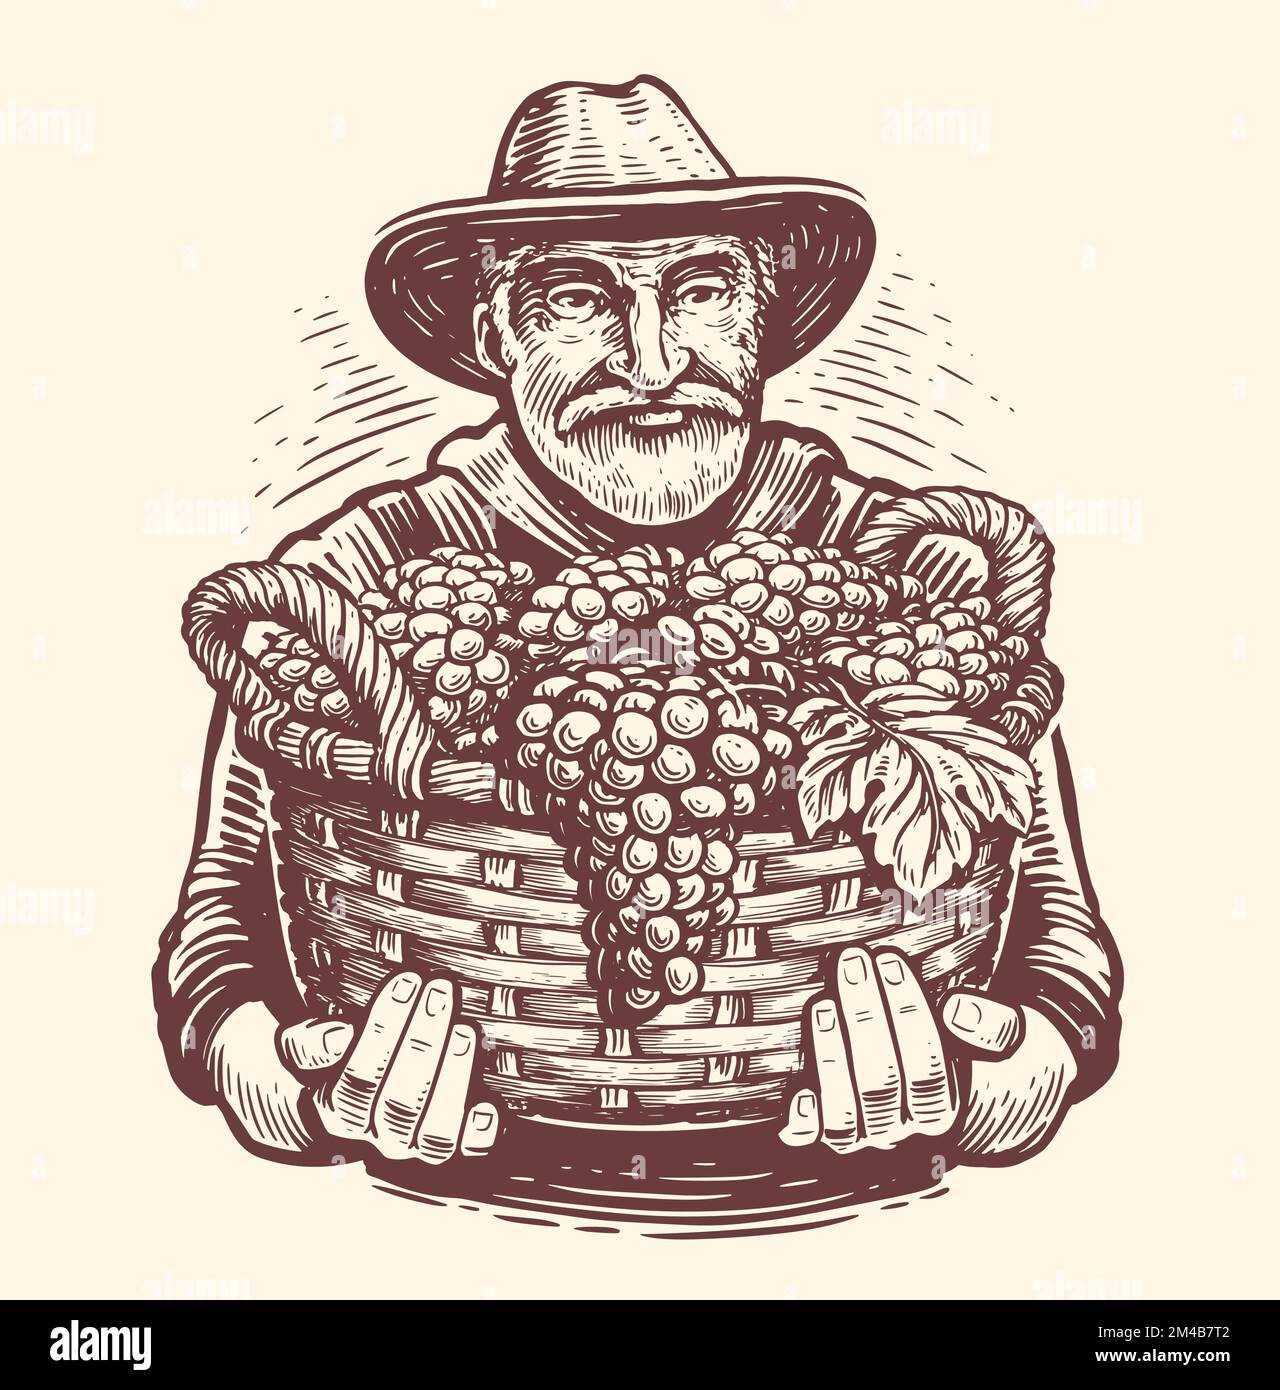 Farmer with full basket of ripe grapes harvested from vineyard. Agriculture, fruit growing sketch. Vintage vector Stock Vector